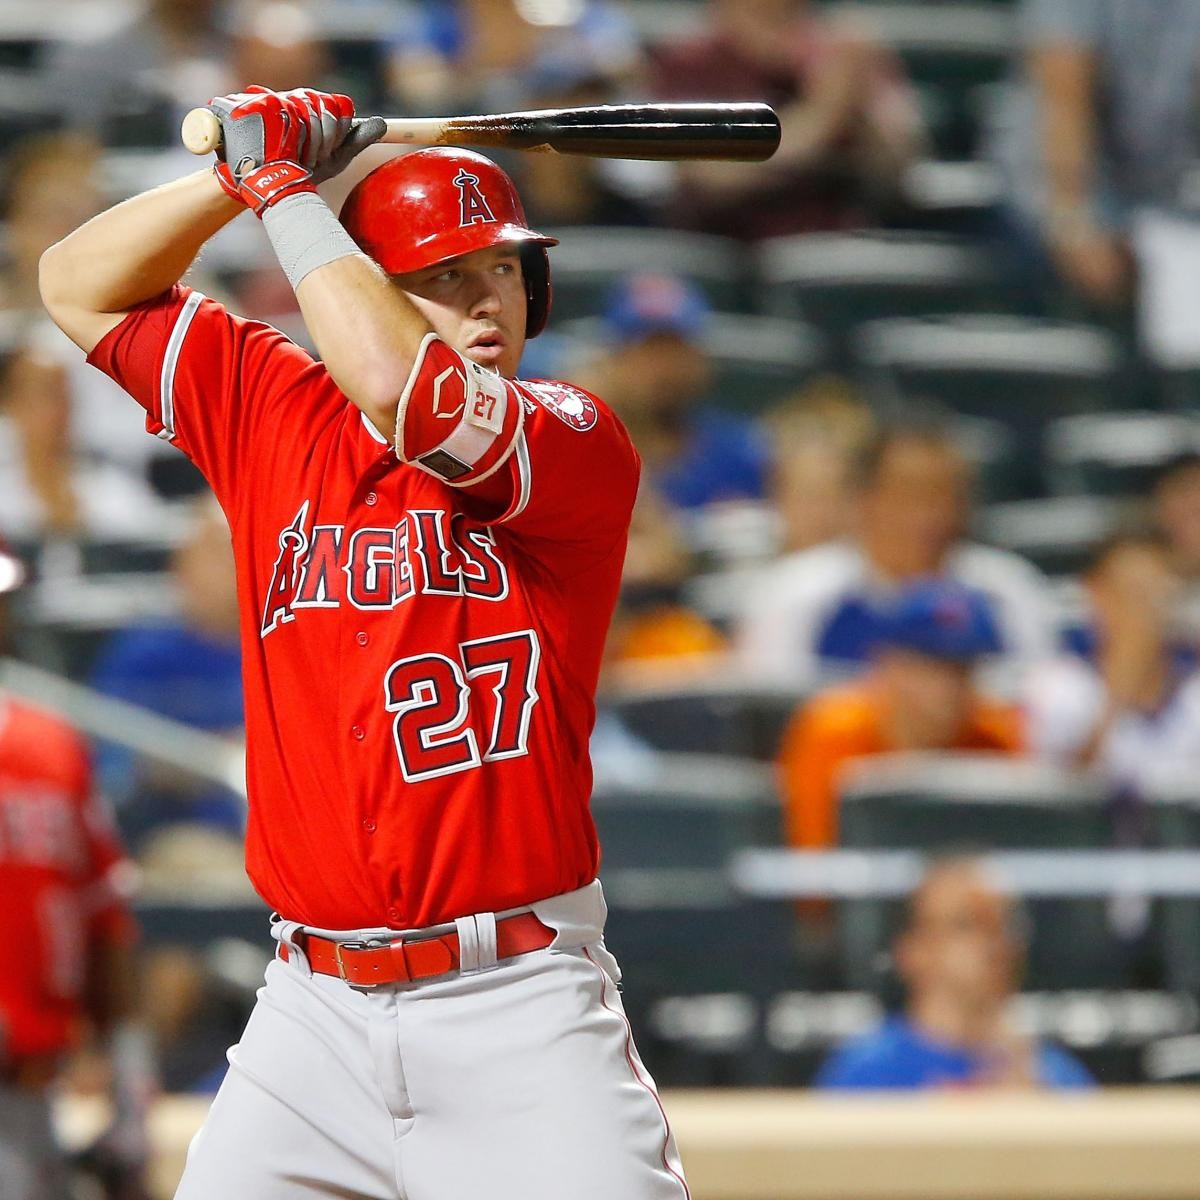 Mike Trout Ties Troy Glaus for 4thMost Home Runs in Angels History